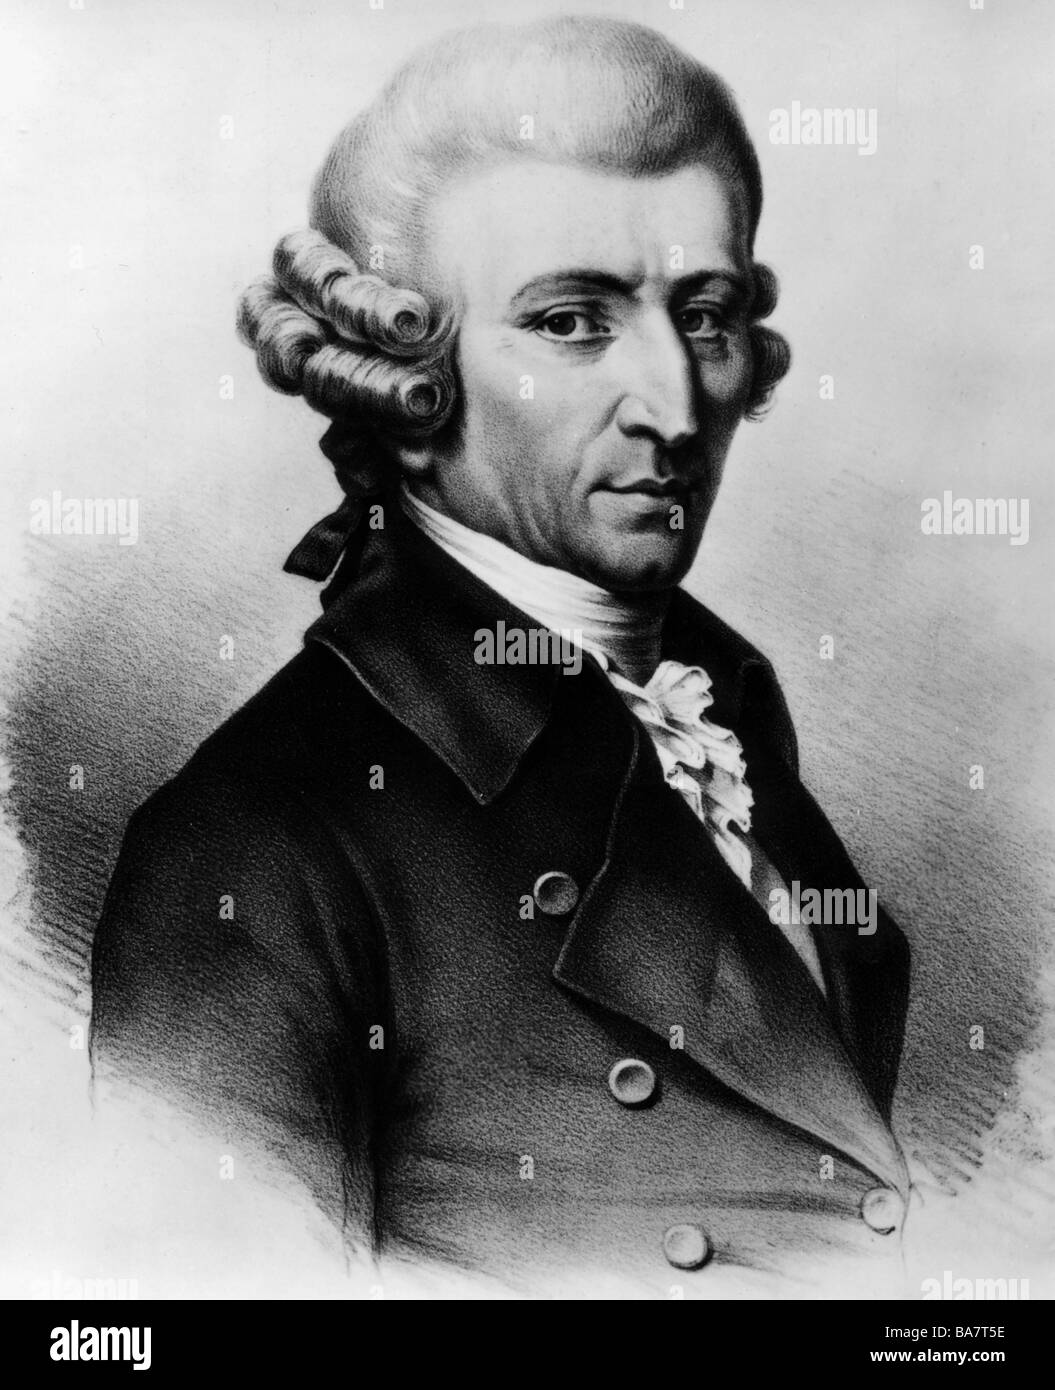 Haydn, Joseph, 31.3.1732 - 31.5.1809, Austrian composer, portrait, steel engraving by Isaac Wilhelm Tegner, early 19th century, , Stock Photo